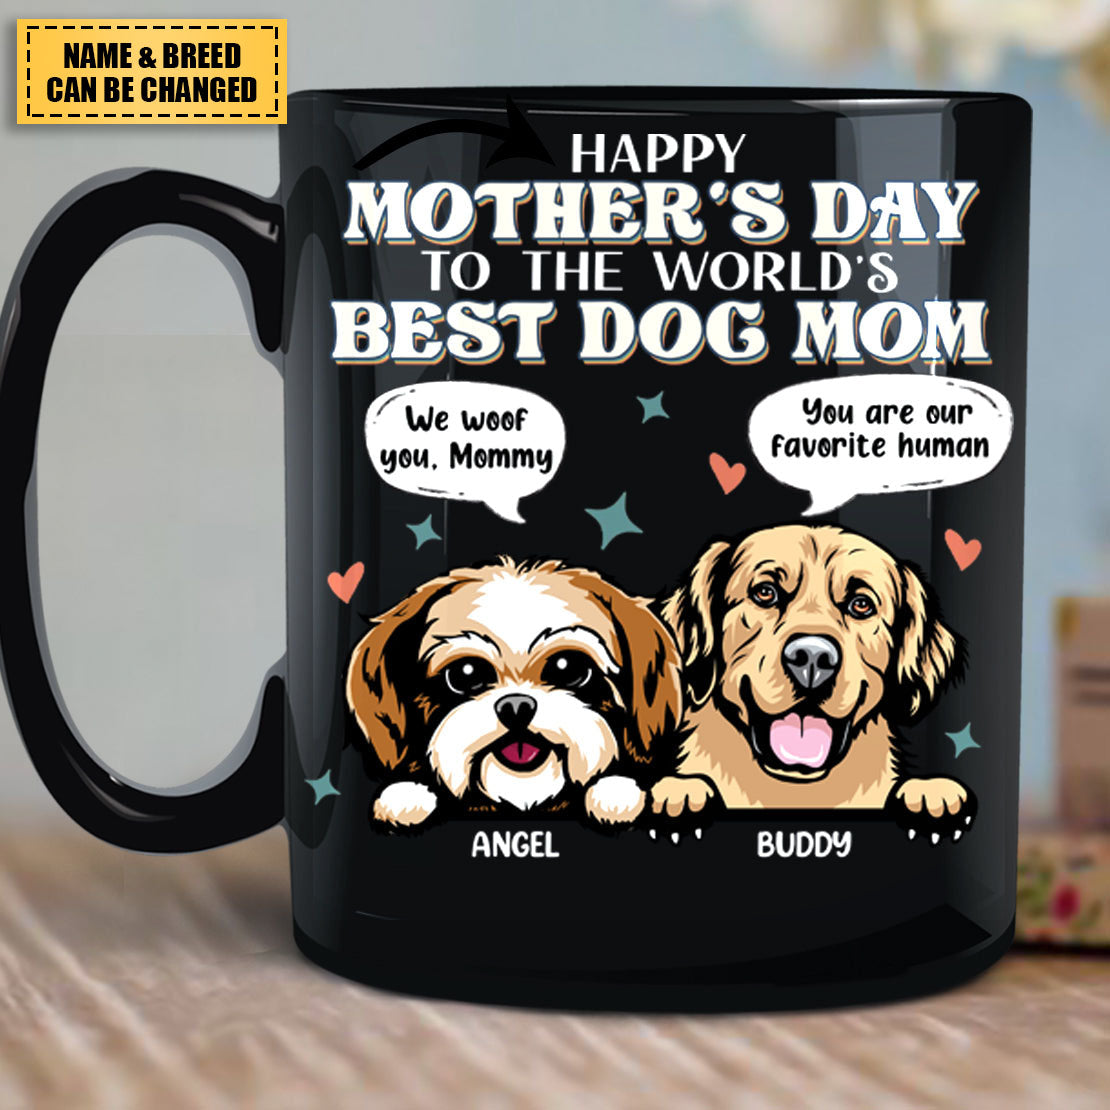 Dog Personalized Mug, Mother's Day Gift for Dog Lovers, Dog Dad, Dog Mom